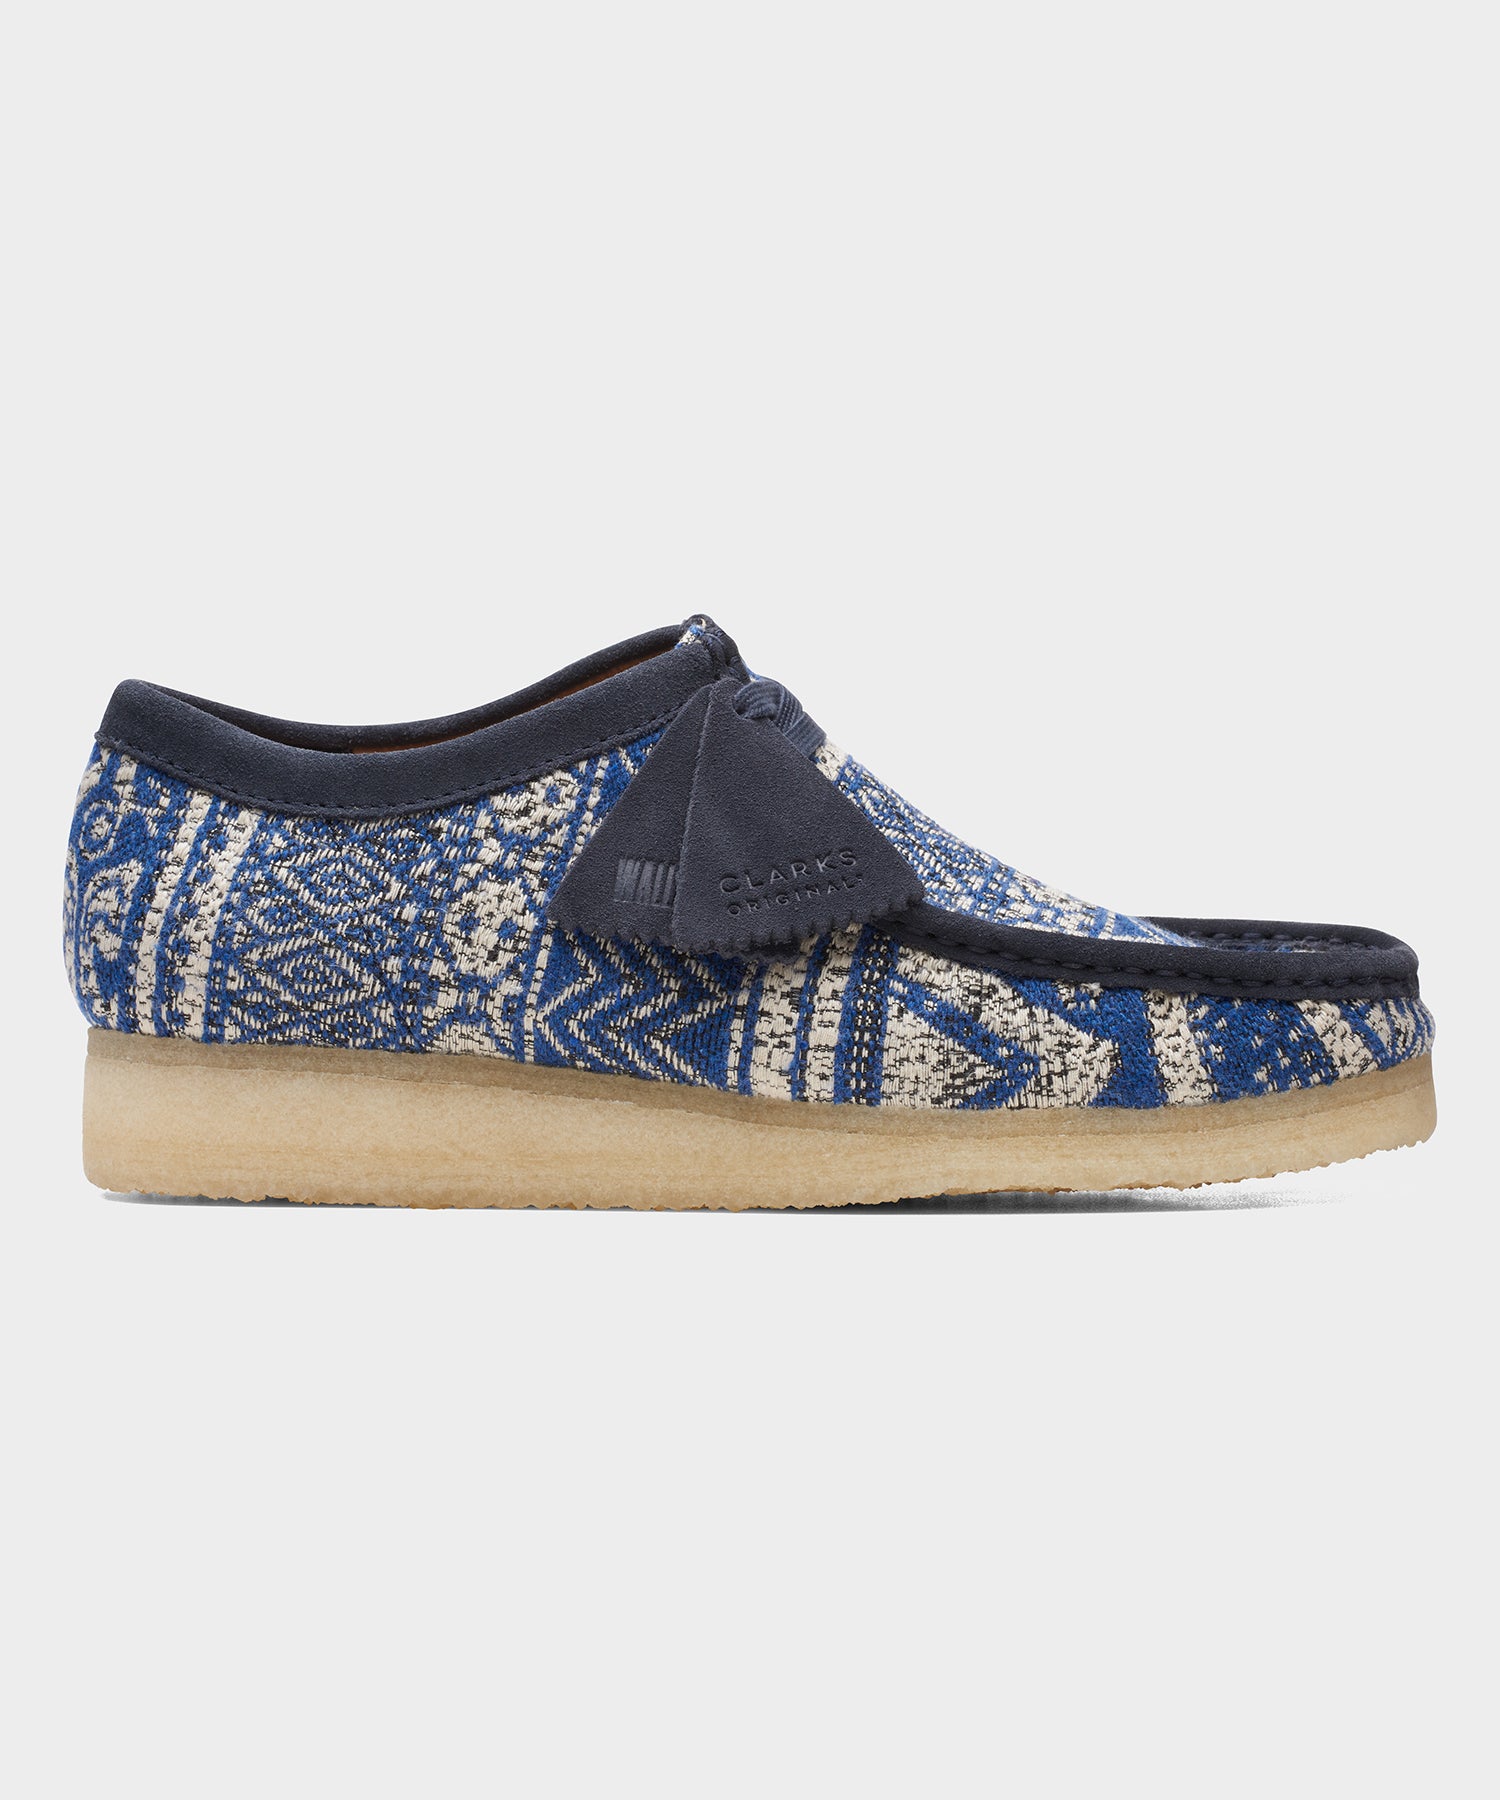 Clarks Wallabee in Blue Fabric - Todd